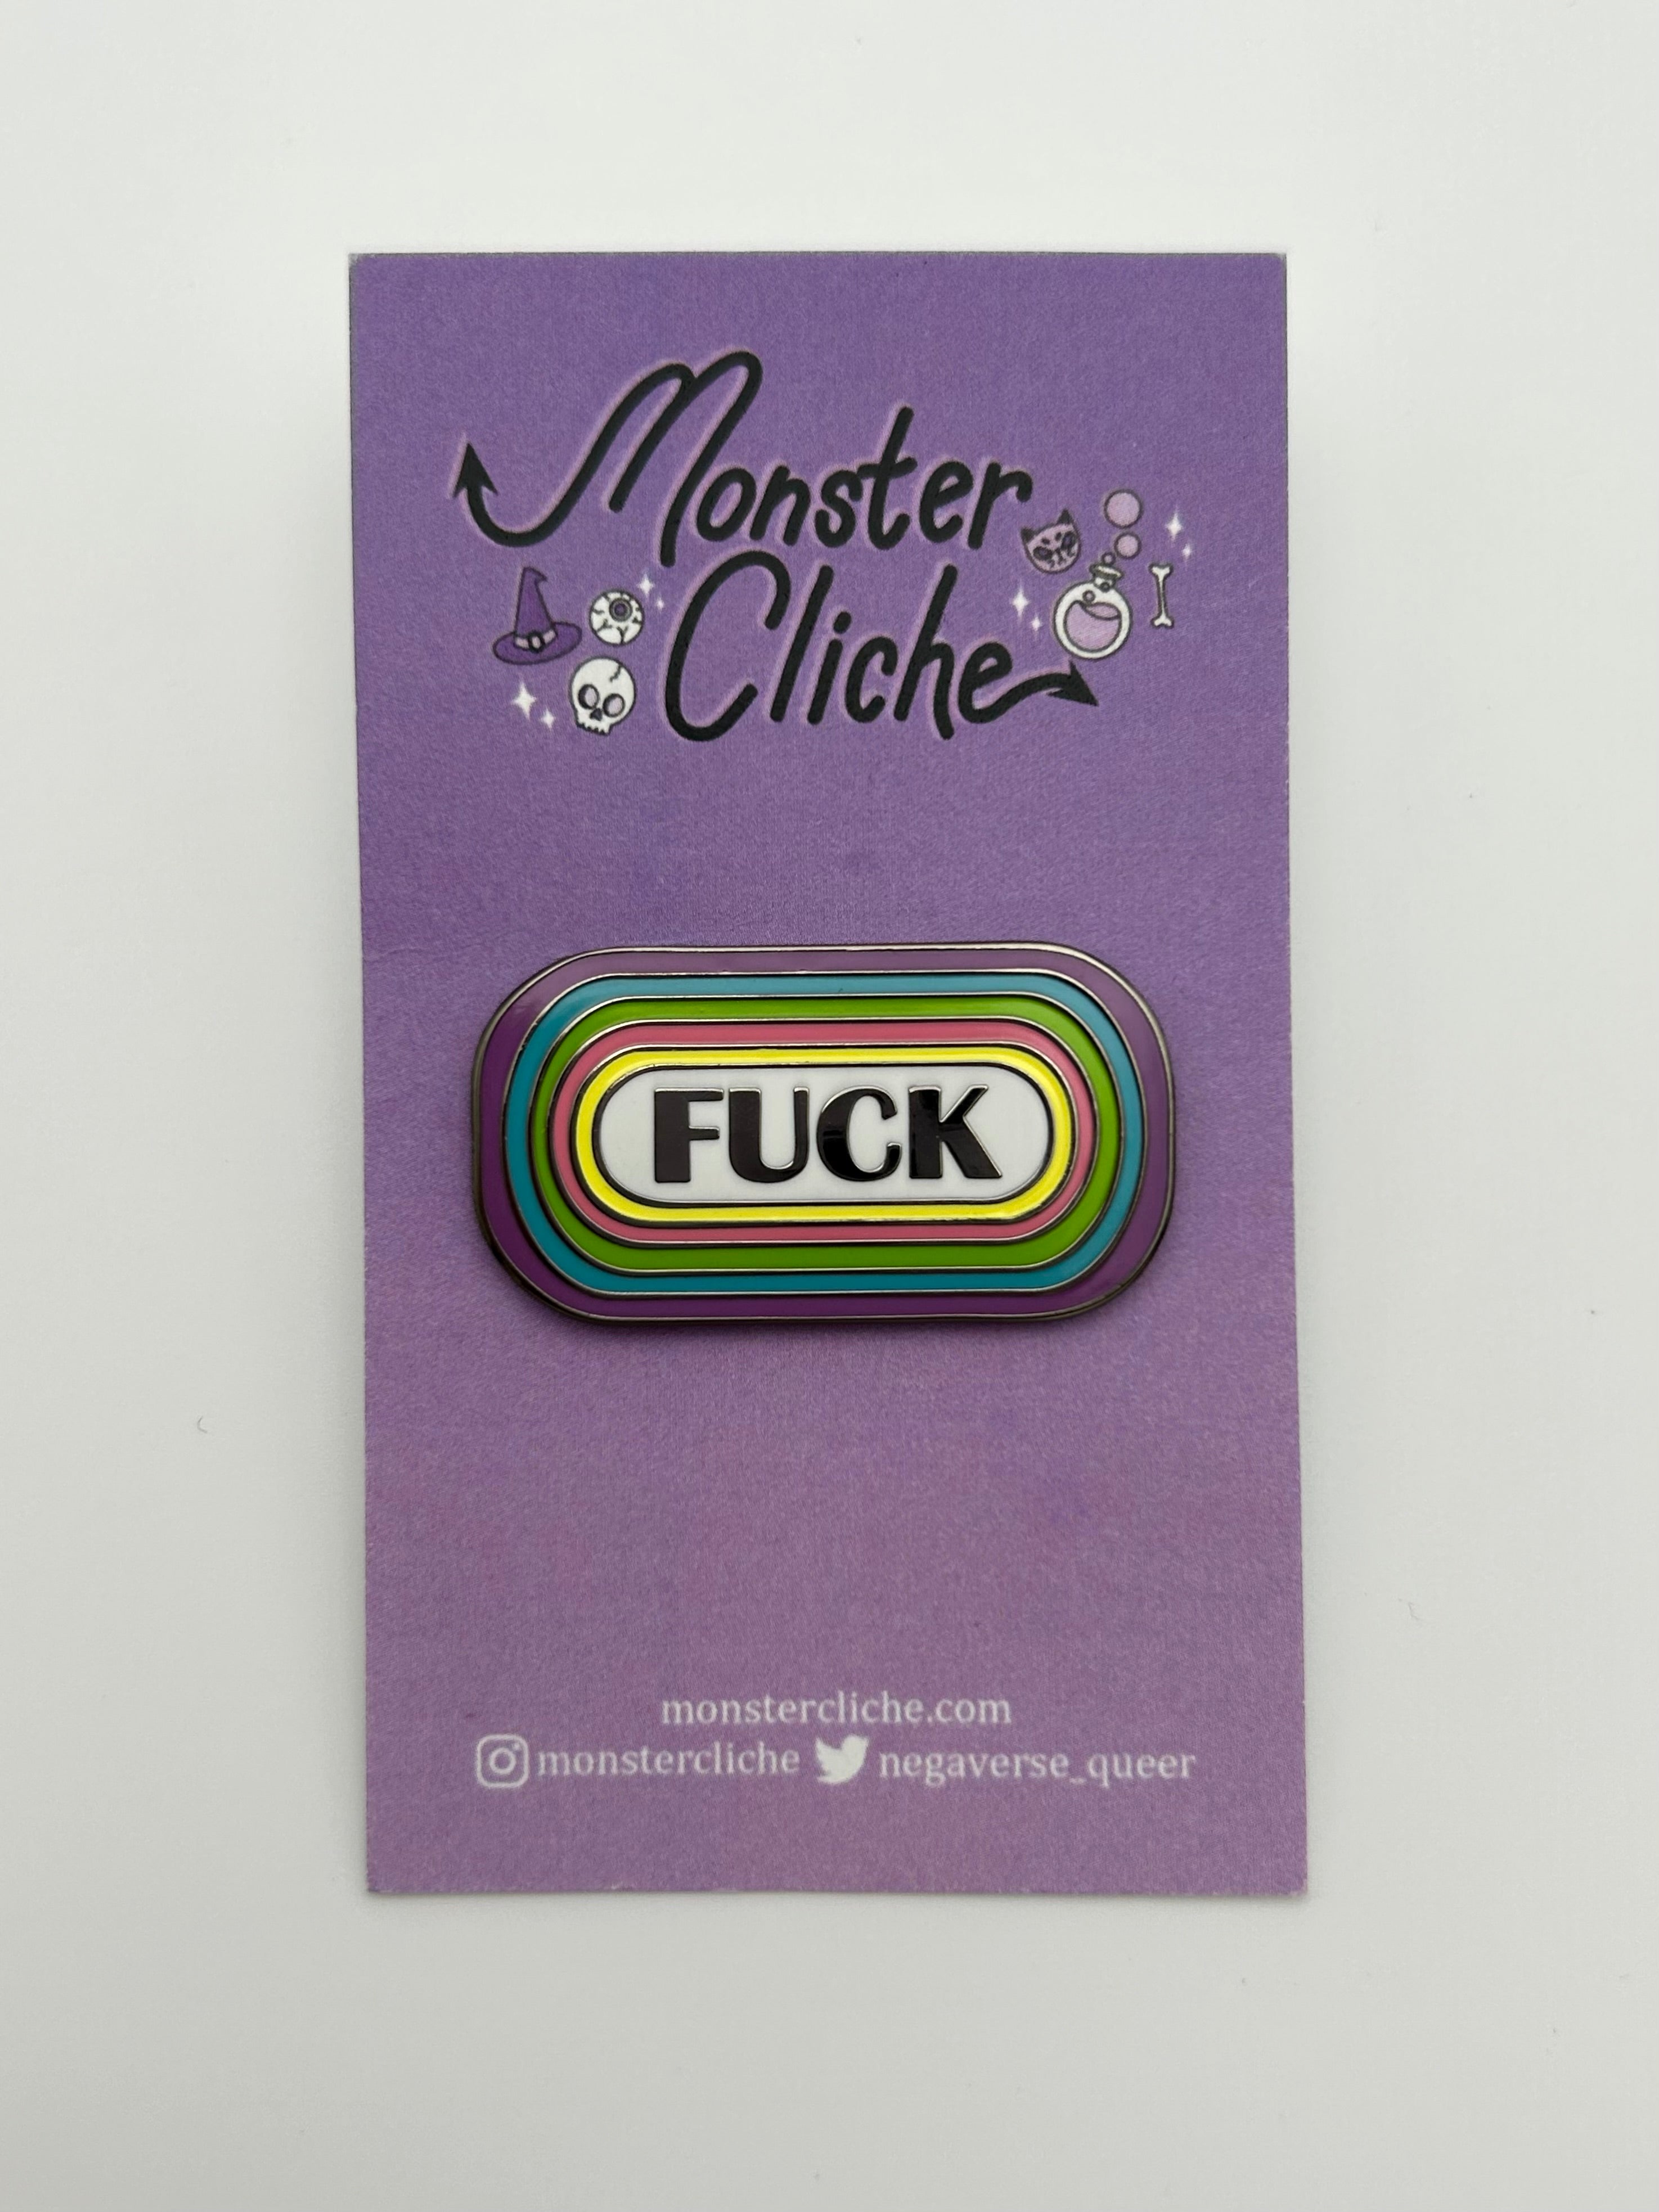 The Fuck pin is attached to the card backing that it comes on, a purple card that says Monster Cliché at the top and the website and social media for the artist at the bottom. Website: monstercliche.com Instagram: @monstercliche Twitter: @megaverse_queer